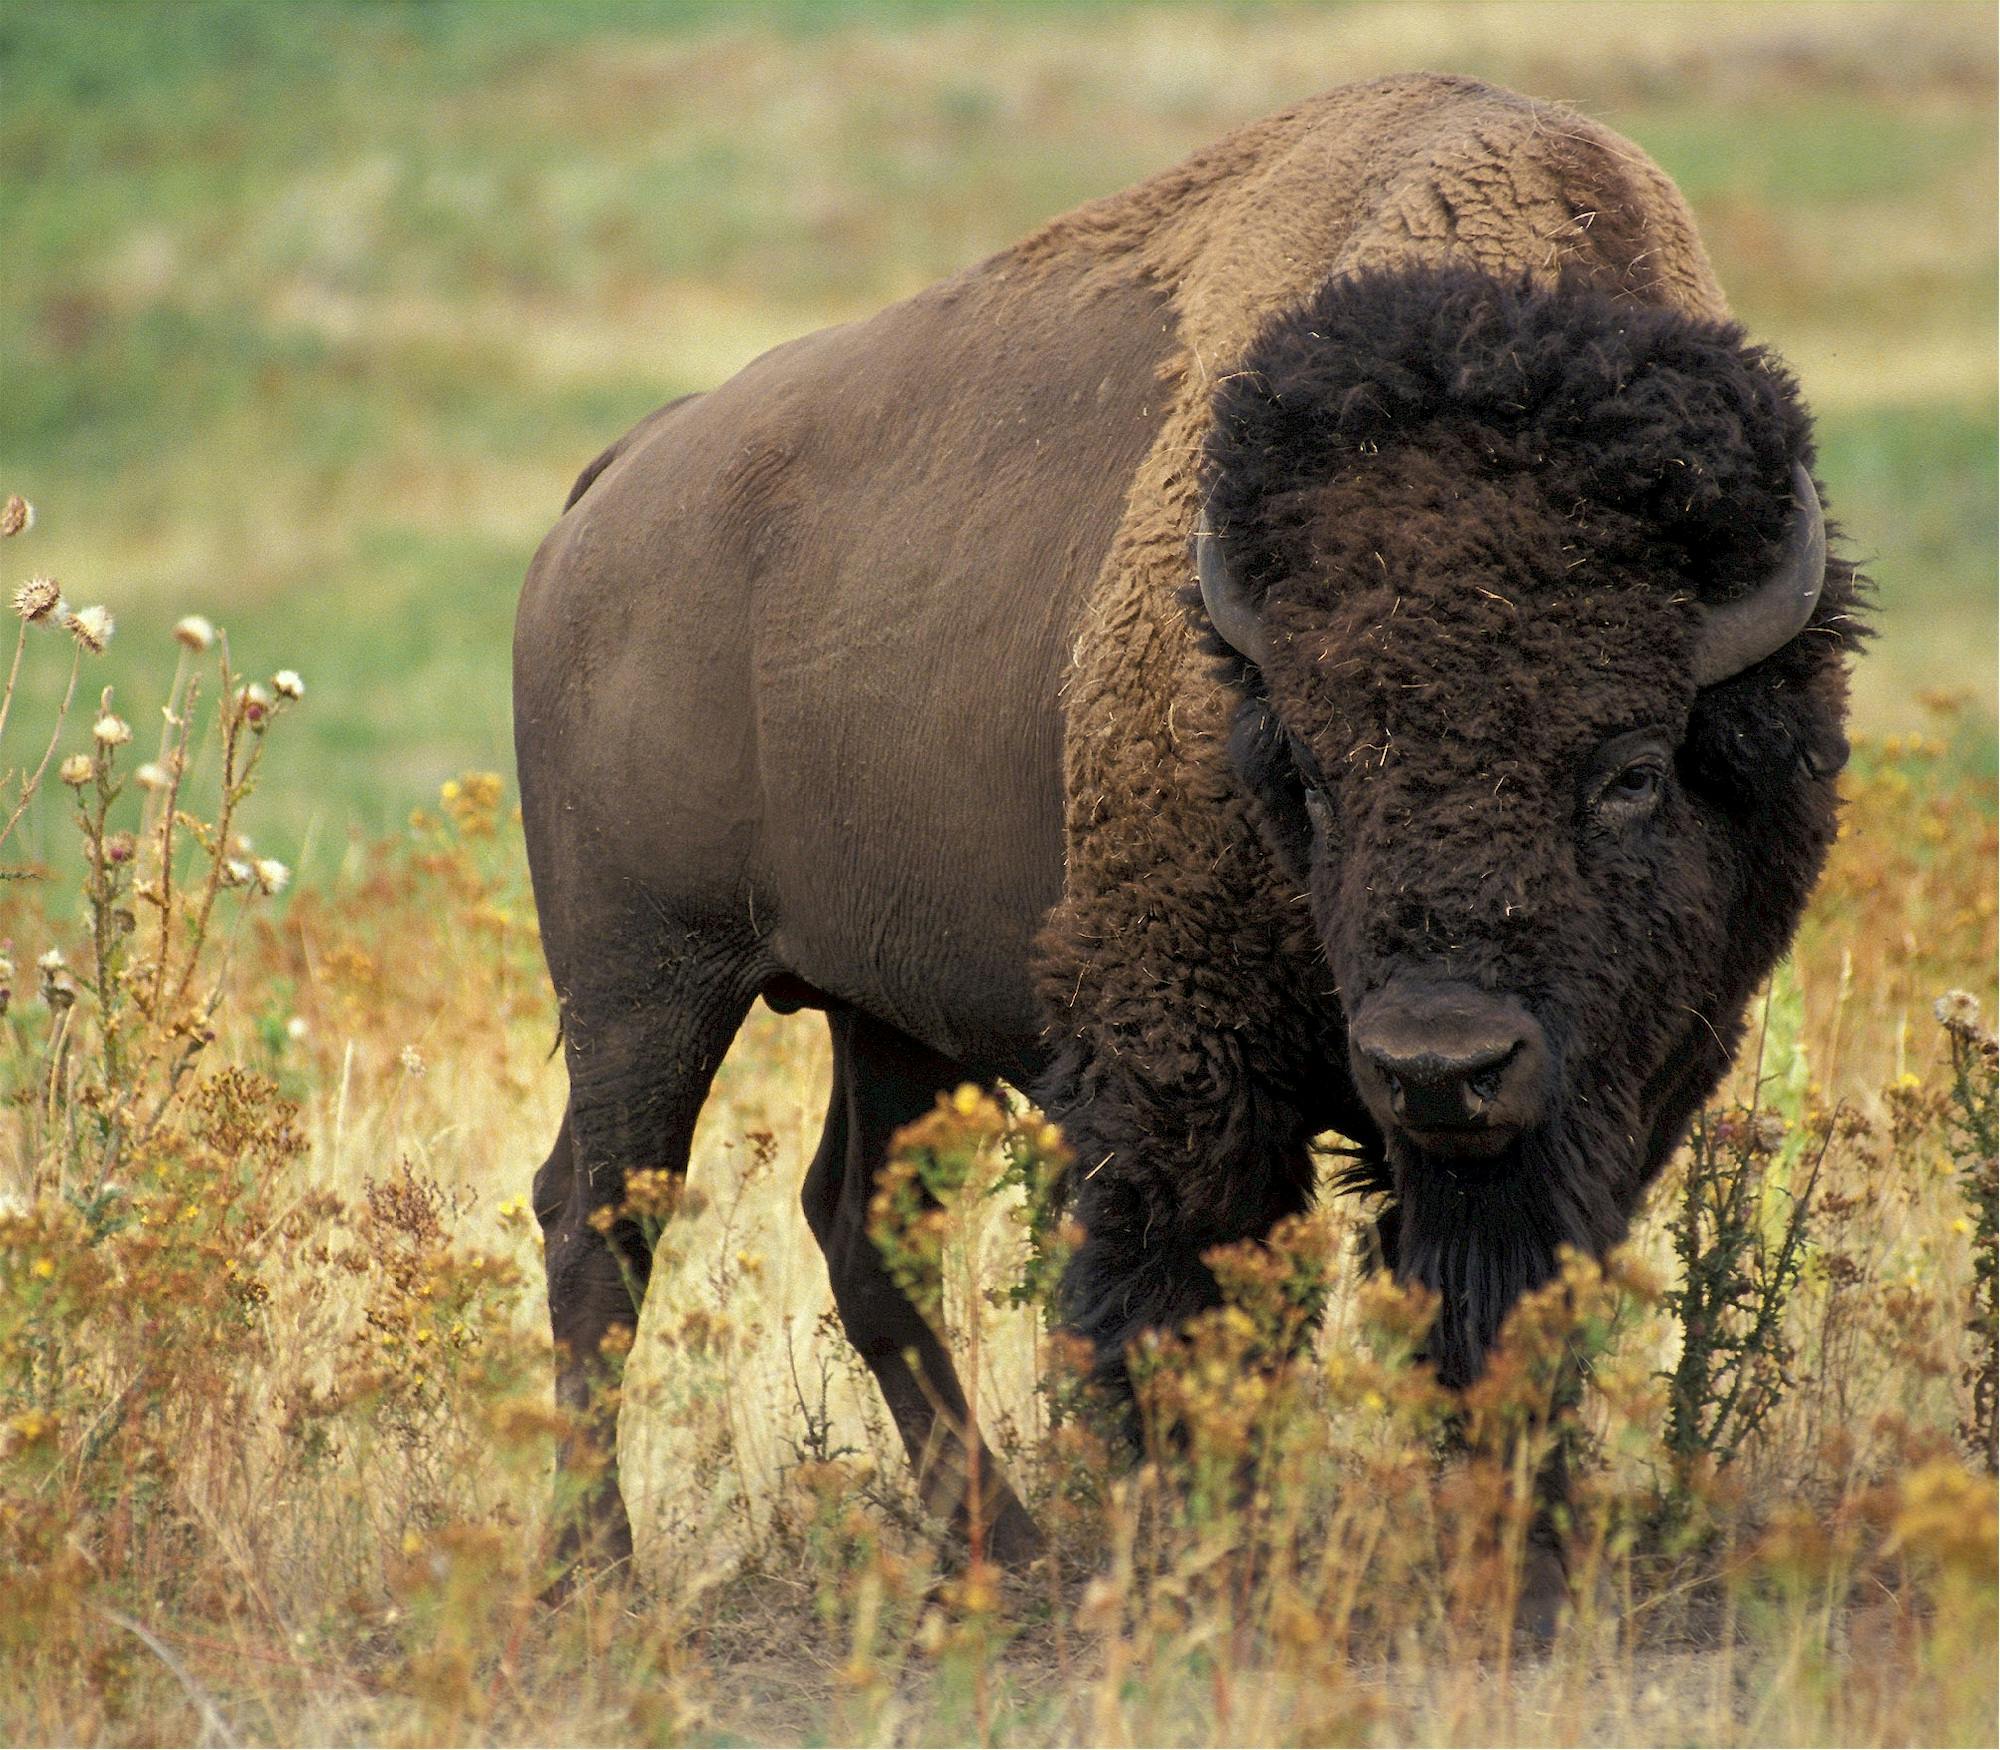 American Bison, also known as buffalo, in the Badlands National Park